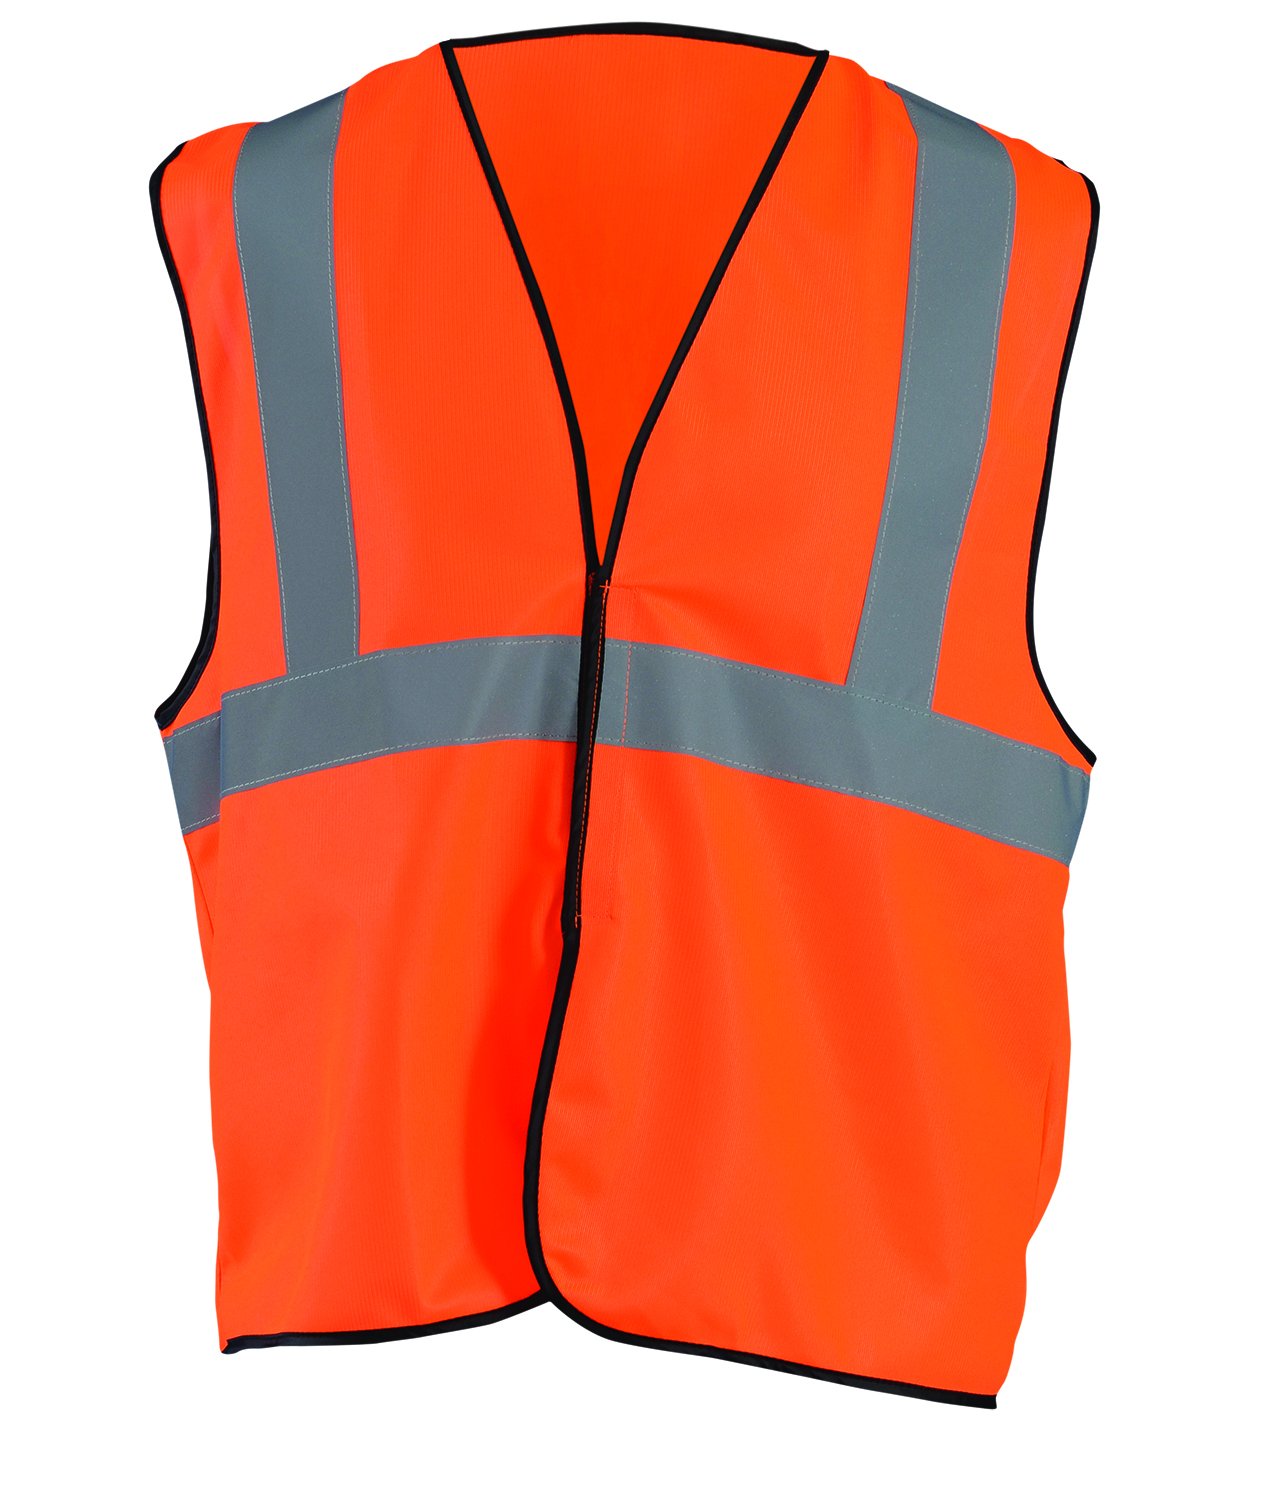 OccuNomix Men's Class 2 Hook & Loop Safety Vest (Large/XL) $0.85 + Free Shipping w/ Prime or $35+